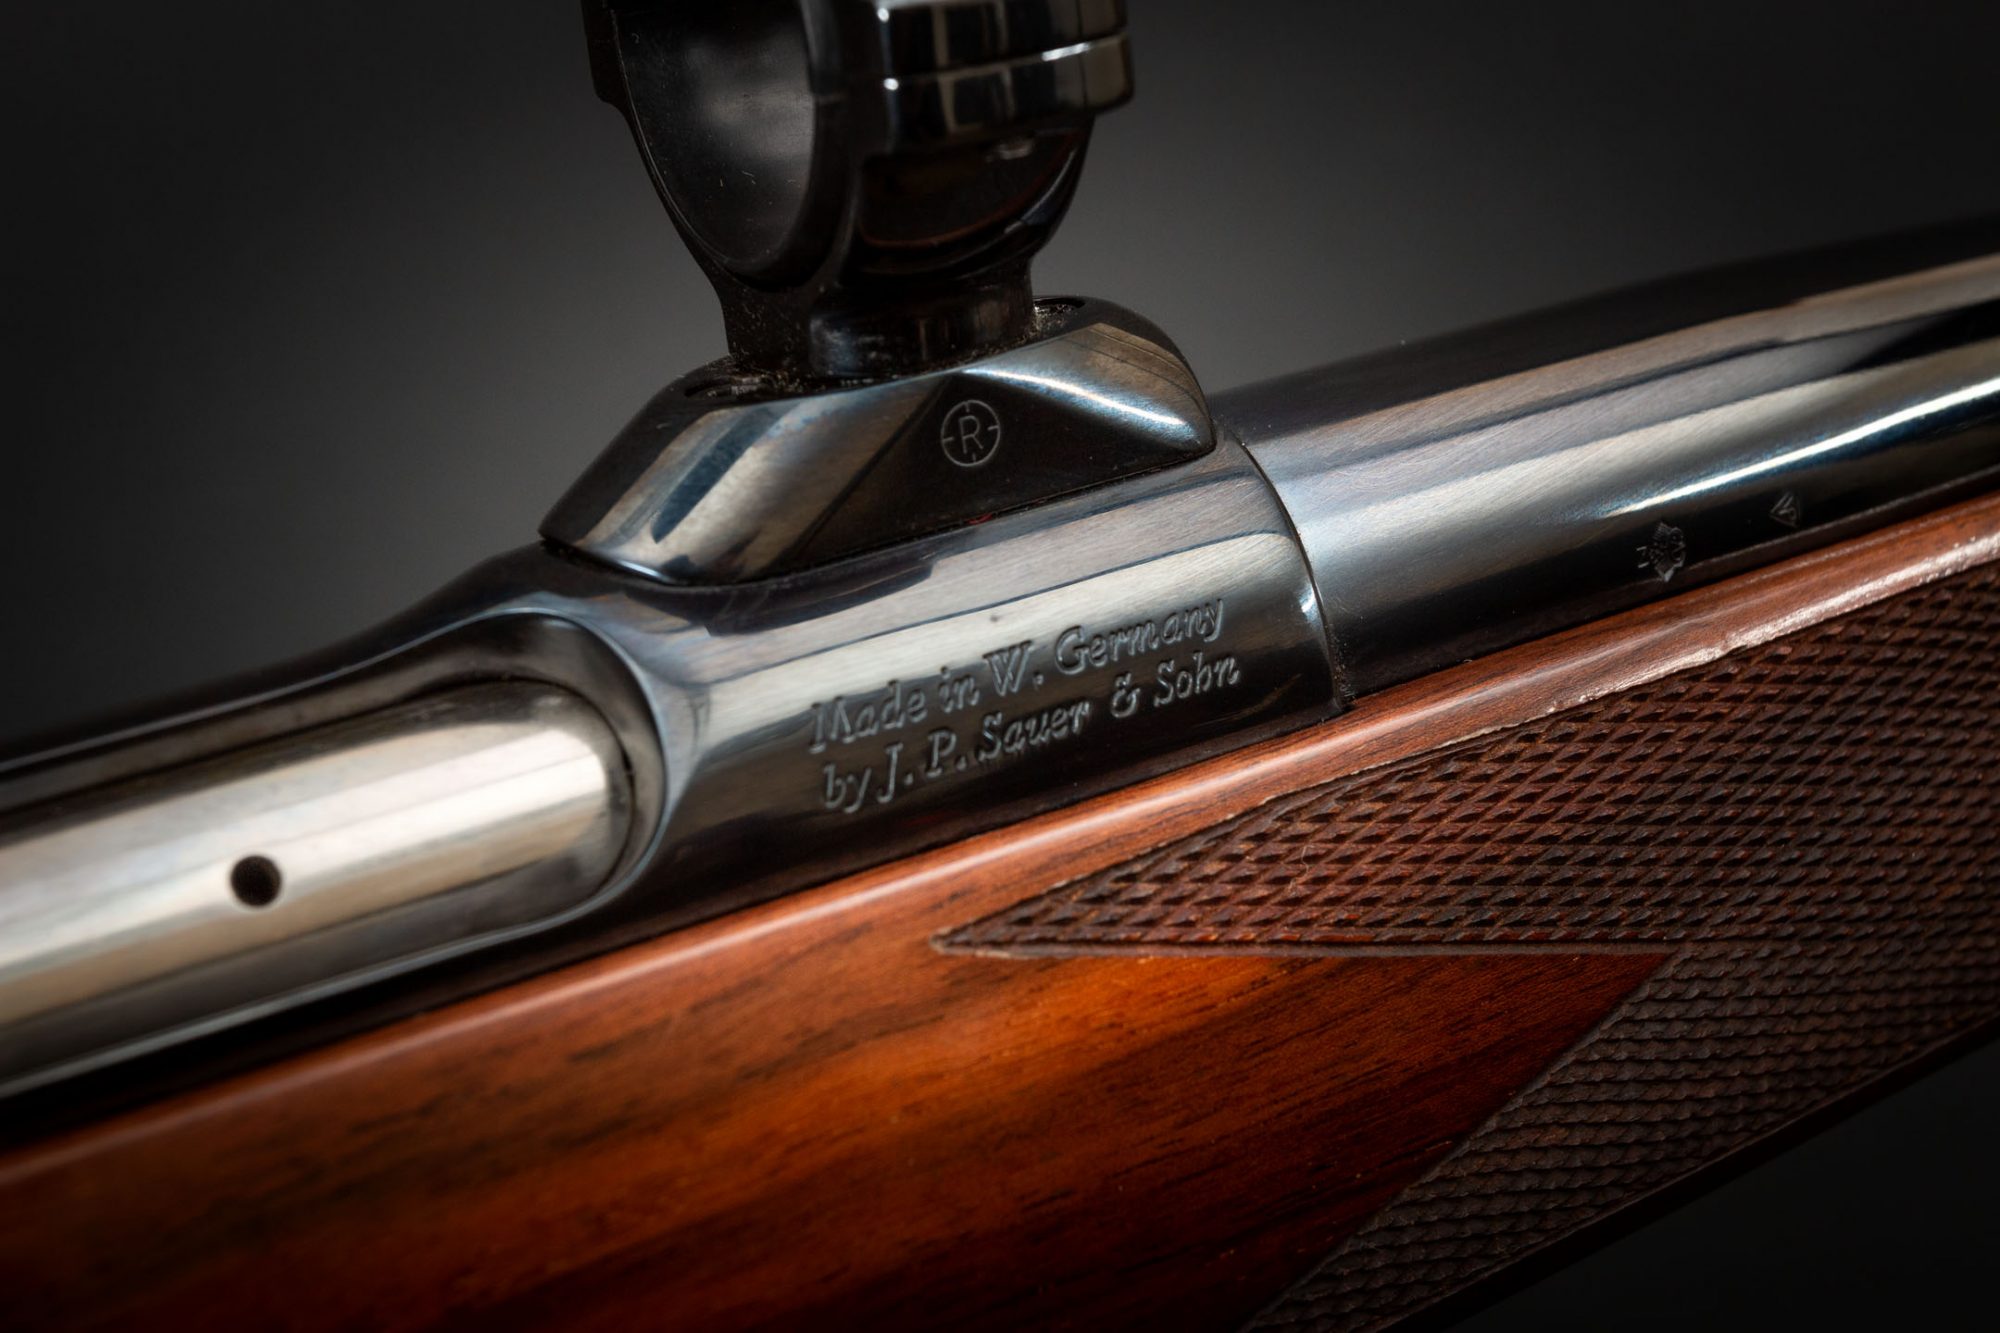 Colt Sauer Sporting Rifle, for sale by Turnbull Restoration Co. of Bloomfield, NY